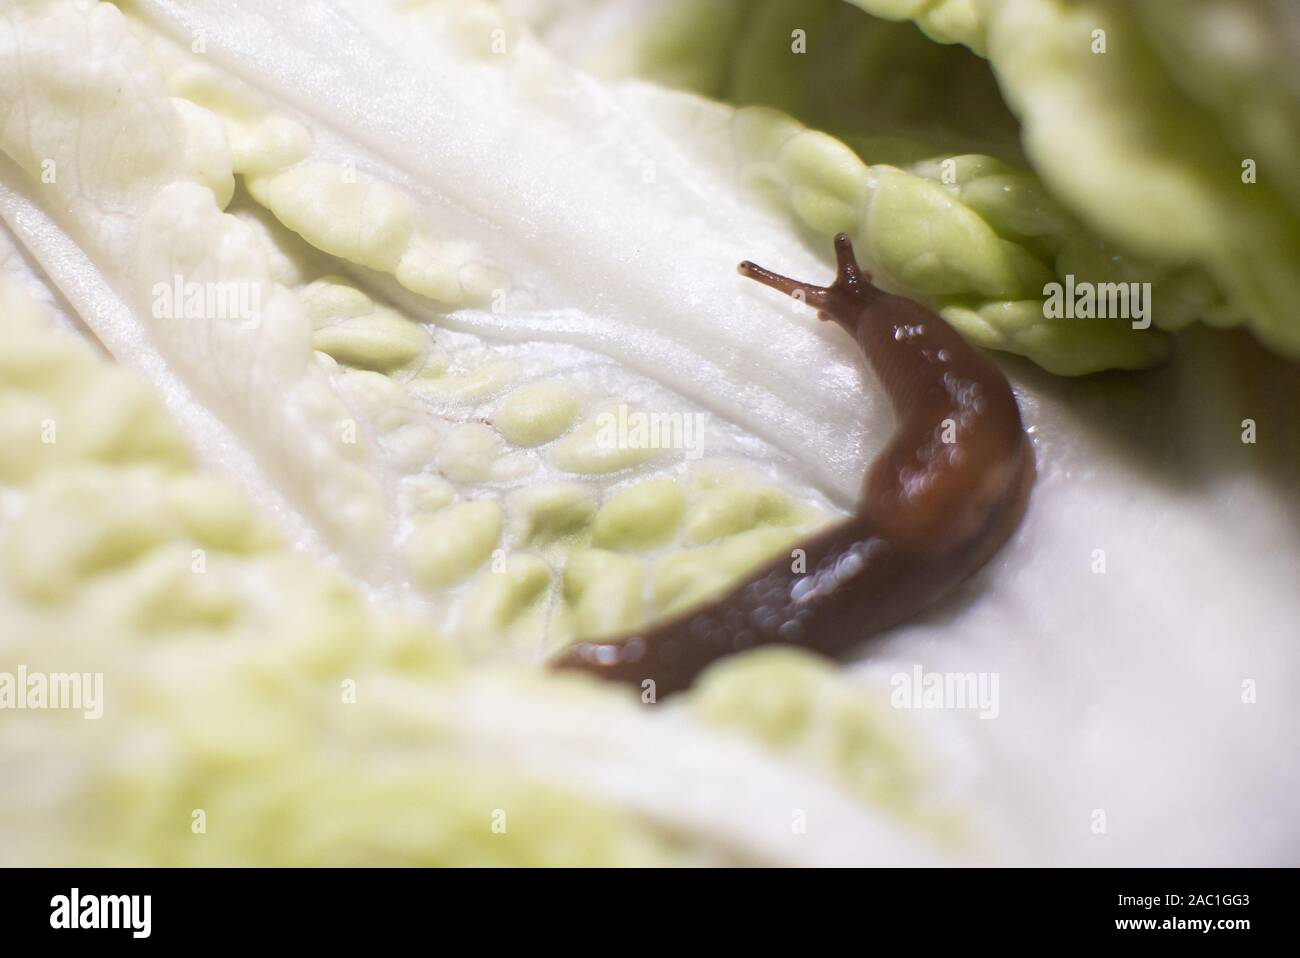 Slime on a sheet of Beijing cabbage, with the horns raised. Stock Photo